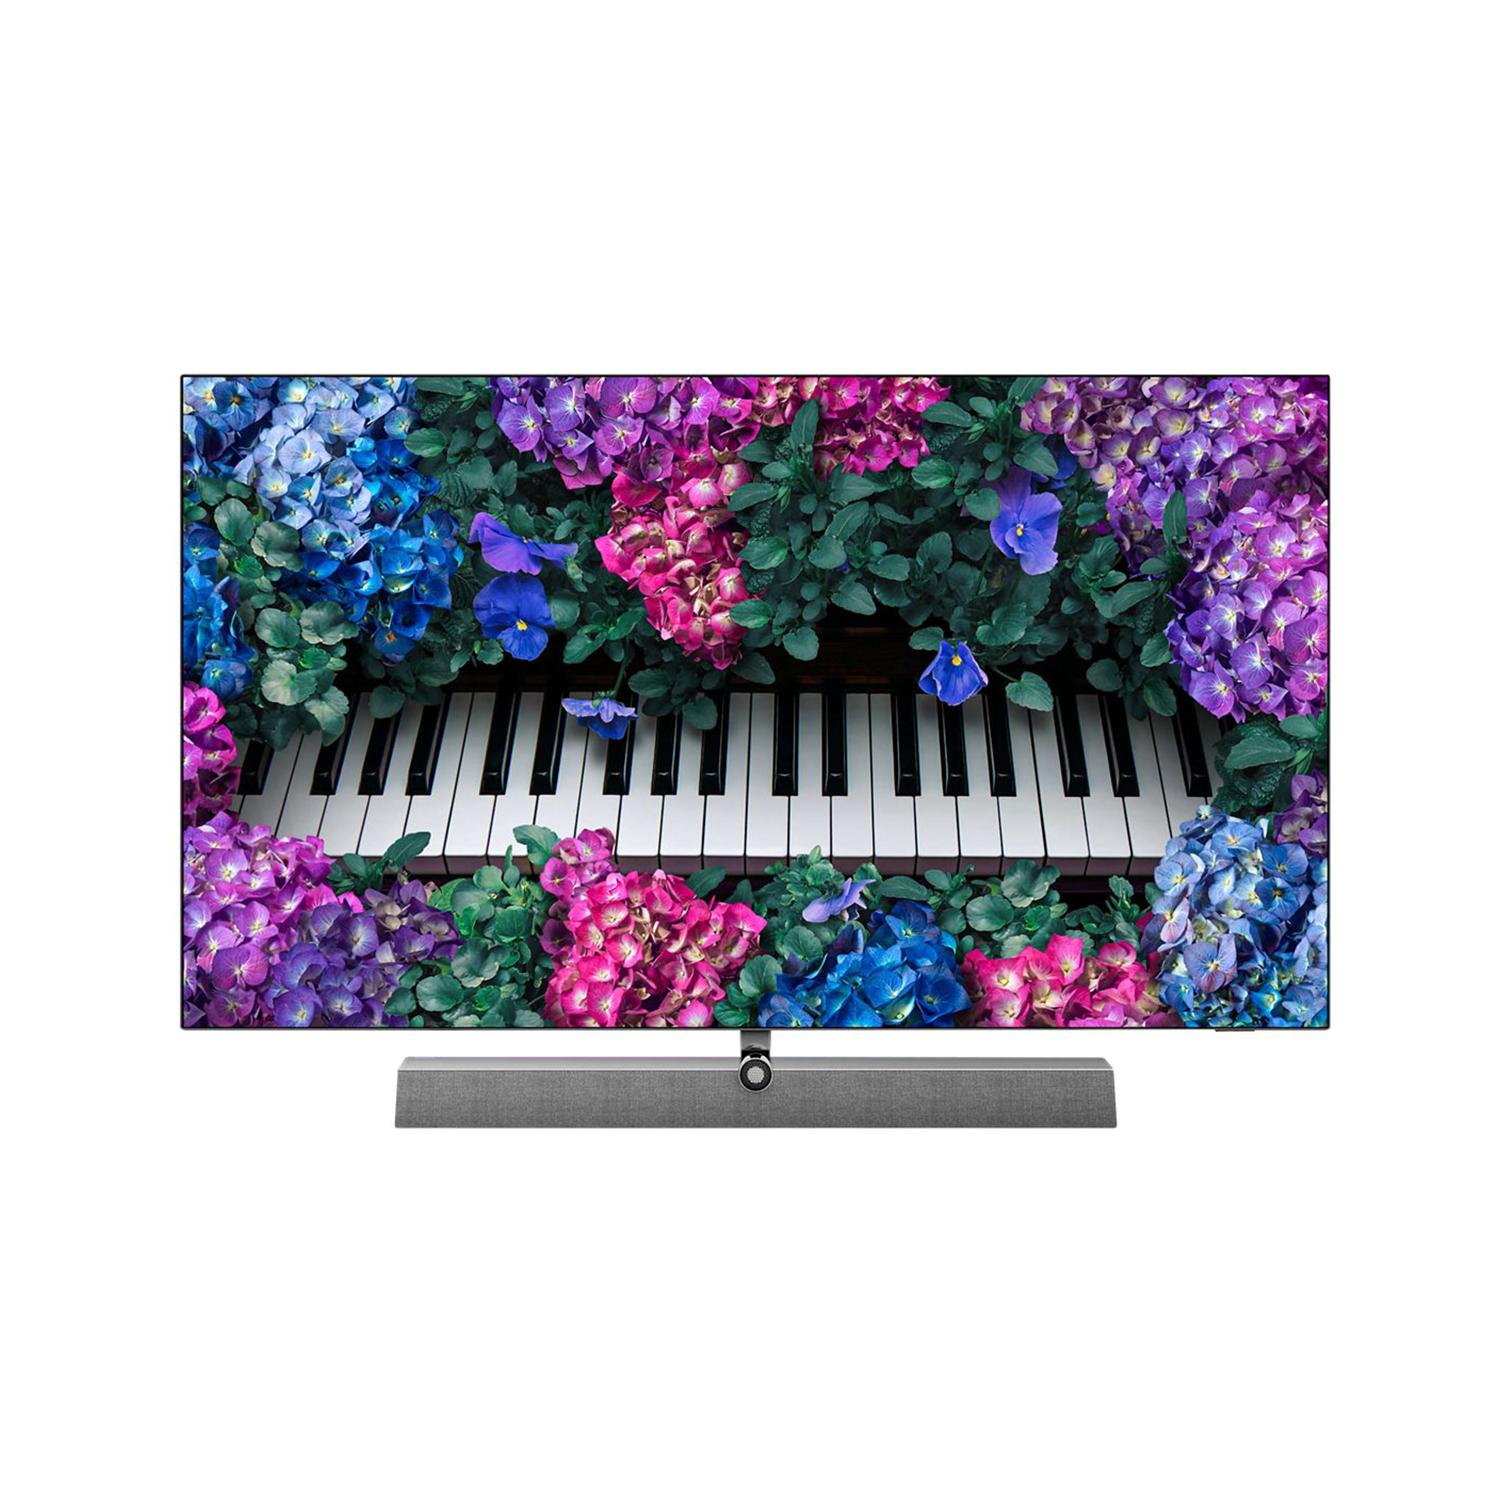 Android / TV 48OLED935 TV™ 121 9 Zoll cm, 4K, Ambilight, PHILIPS (Pie)) 48 (Flat, OLED UHD